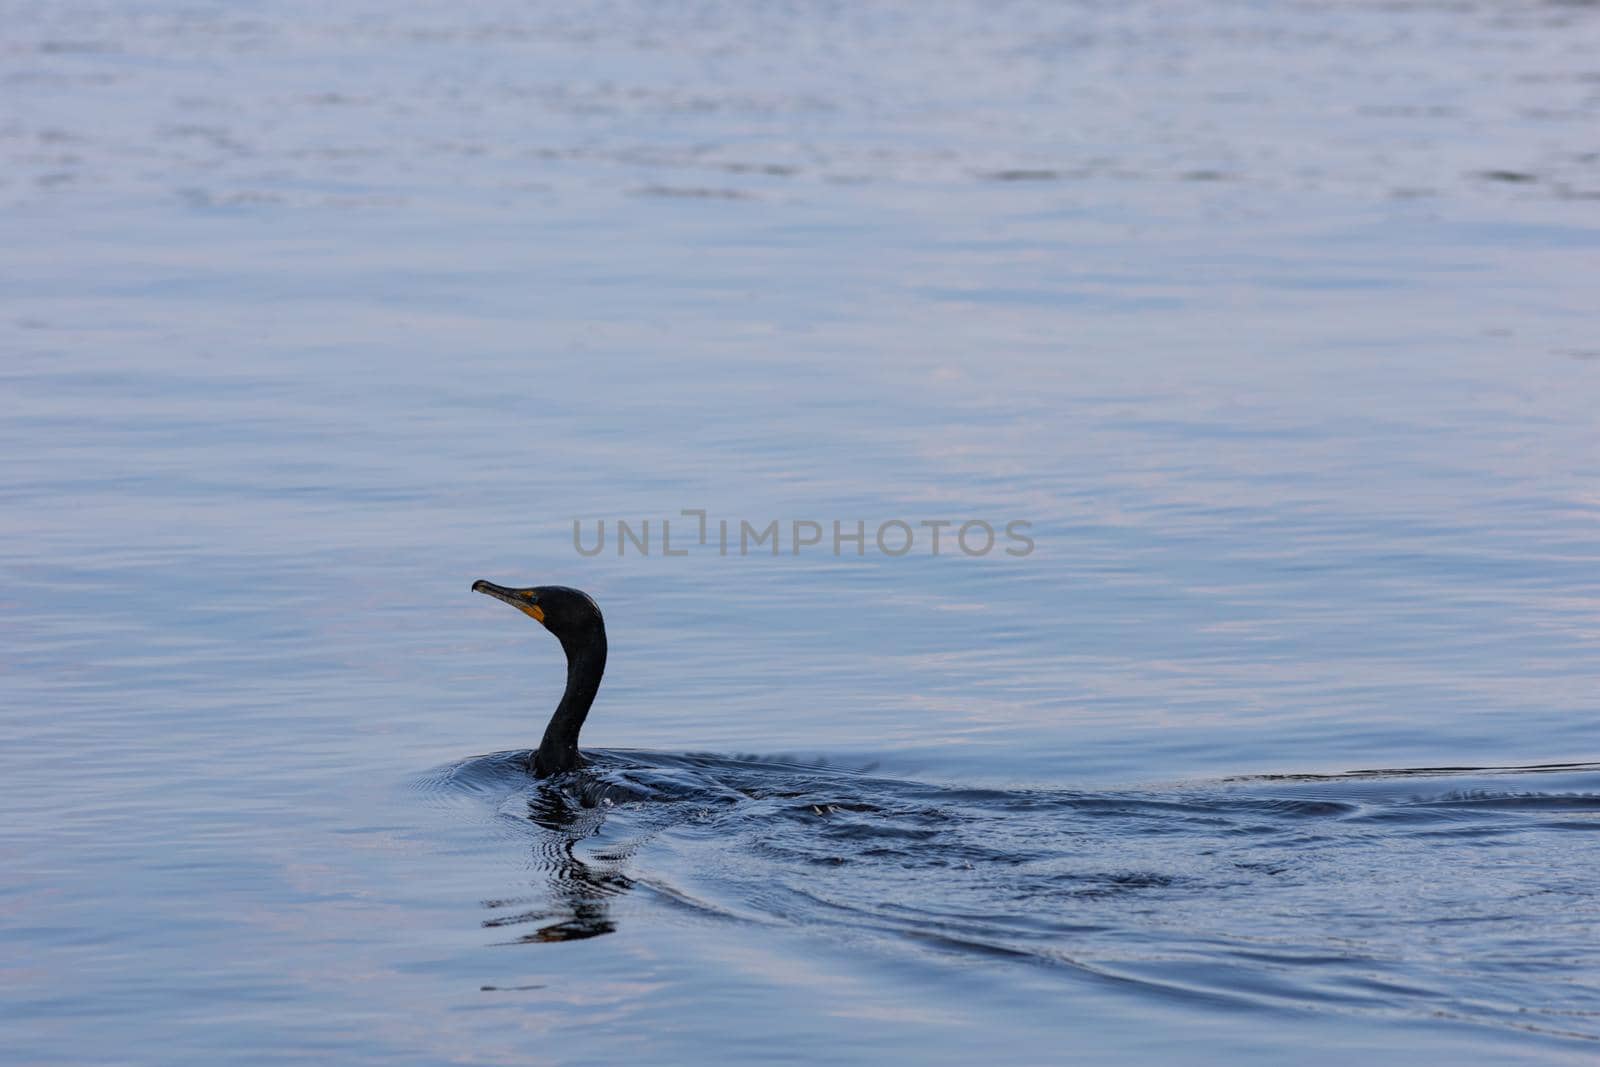 A double-crested cormorant (Phalacrocorax auritus) is swimming across the blue surface of the Ottawa River. The bird's dark head and neck can be seen above the water, as most of its body is submerged.